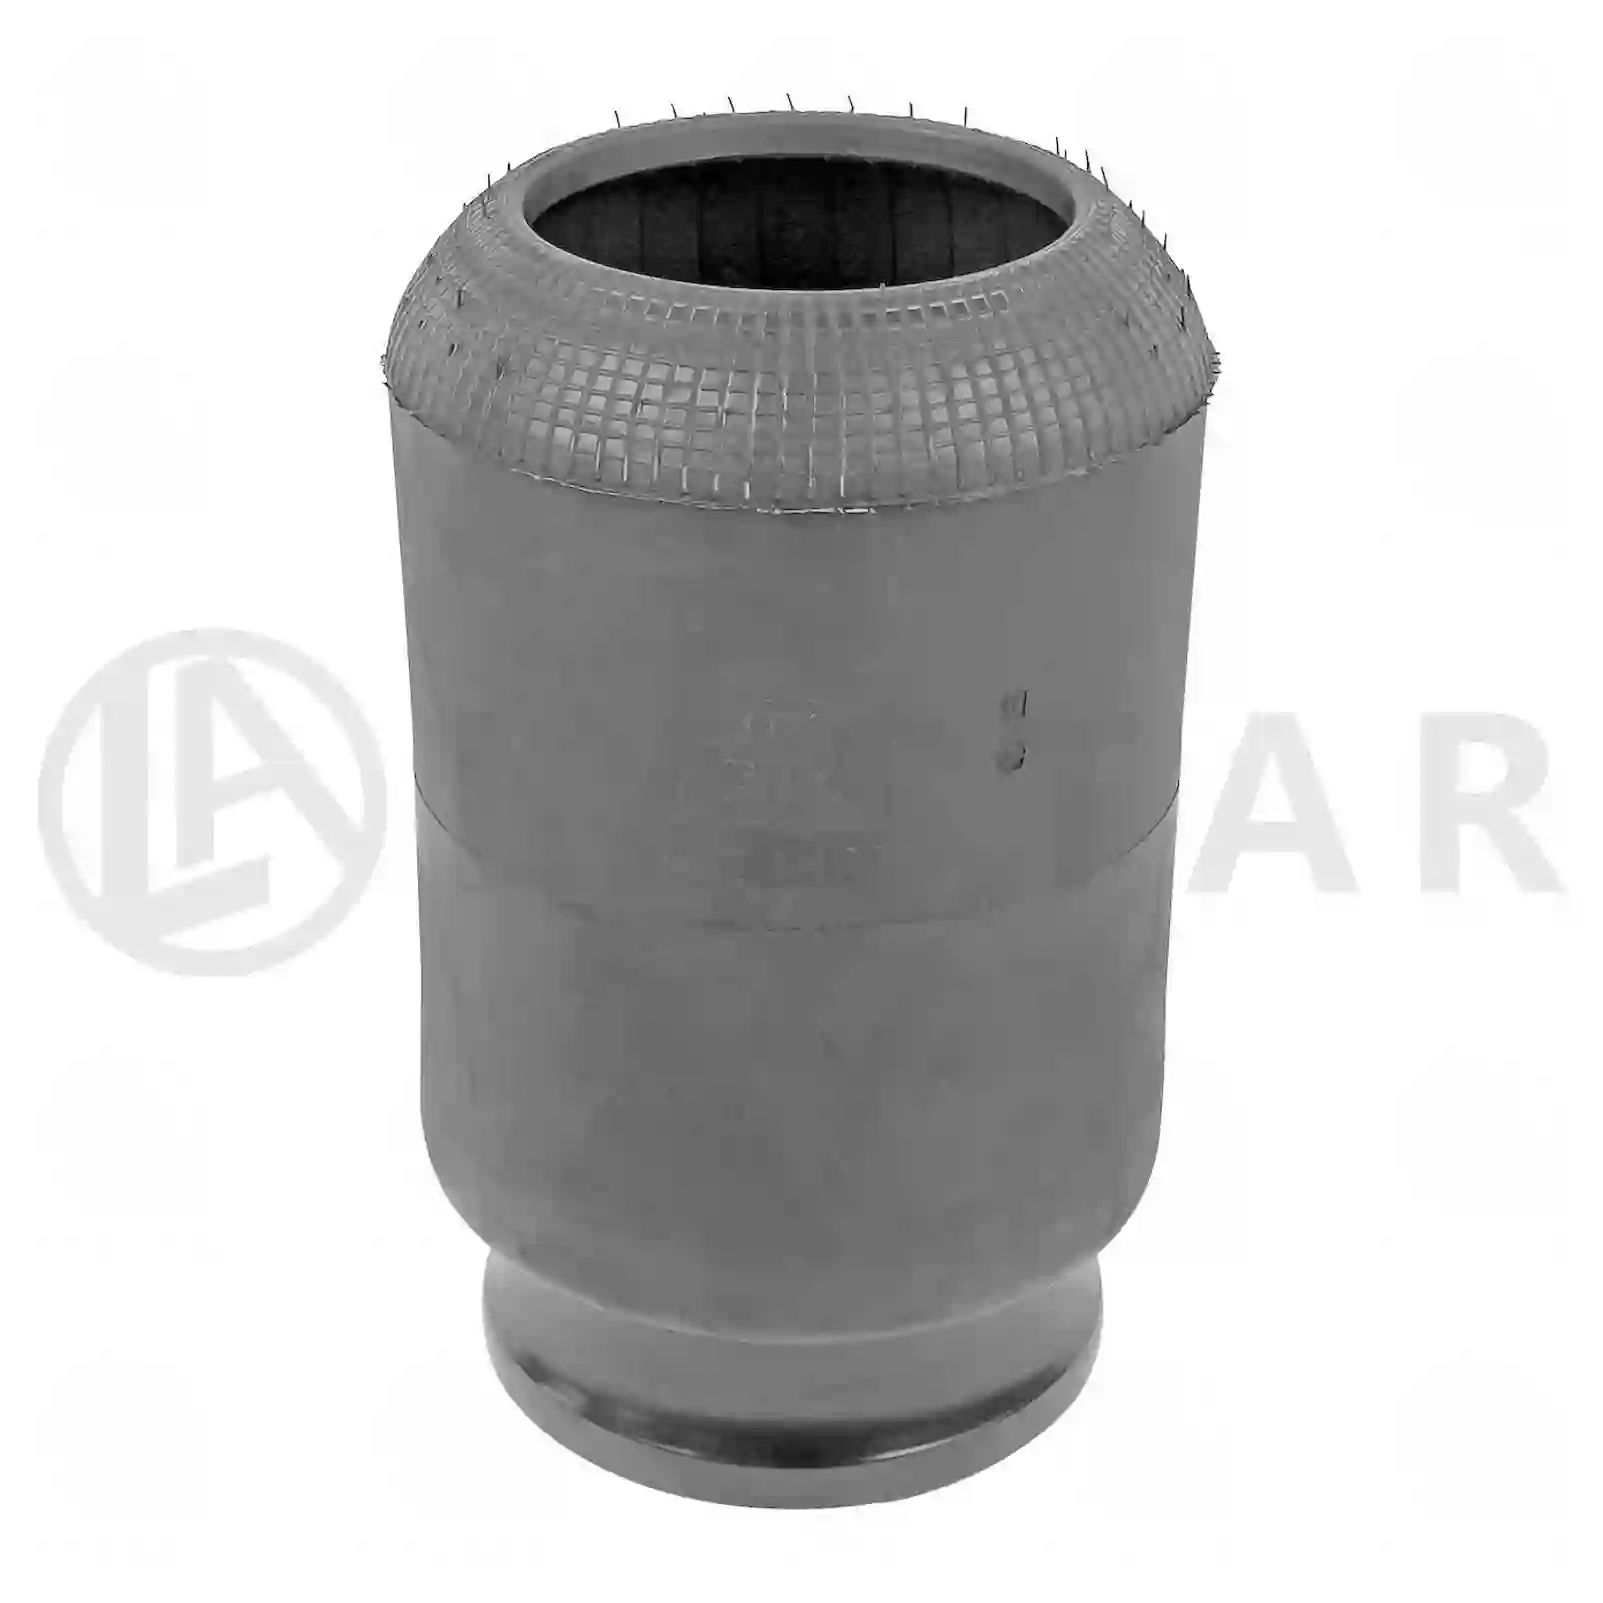 Air spring, with steel piston, 77729676, 70377052, , ||  77729676 Lastar Spare Part | Truck Spare Parts, Auotomotive Spare Parts Air spring, with steel piston, 77729676, 70377052, , ||  77729676 Lastar Spare Part | Truck Spare Parts, Auotomotive Spare Parts